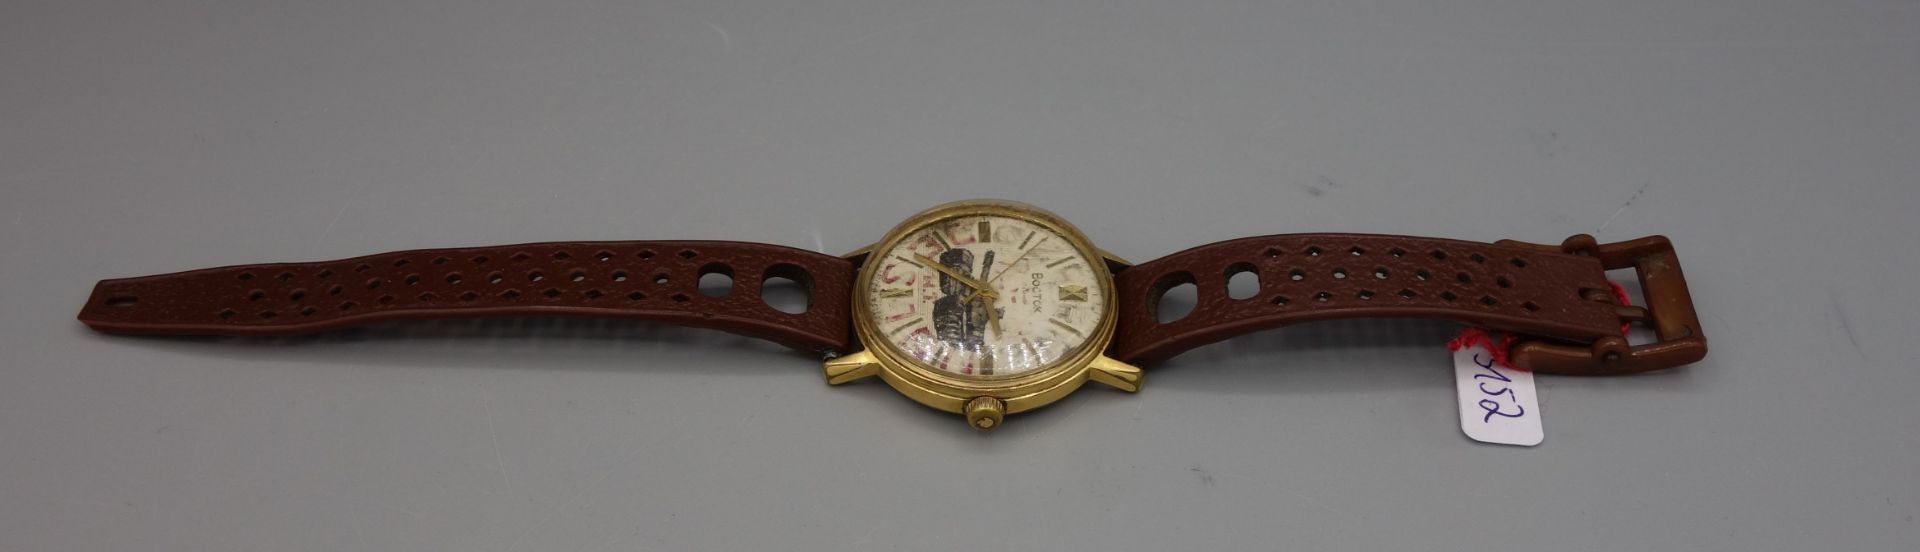 VINTAGE WATCH: WOSTOK  - Image 3 of 6